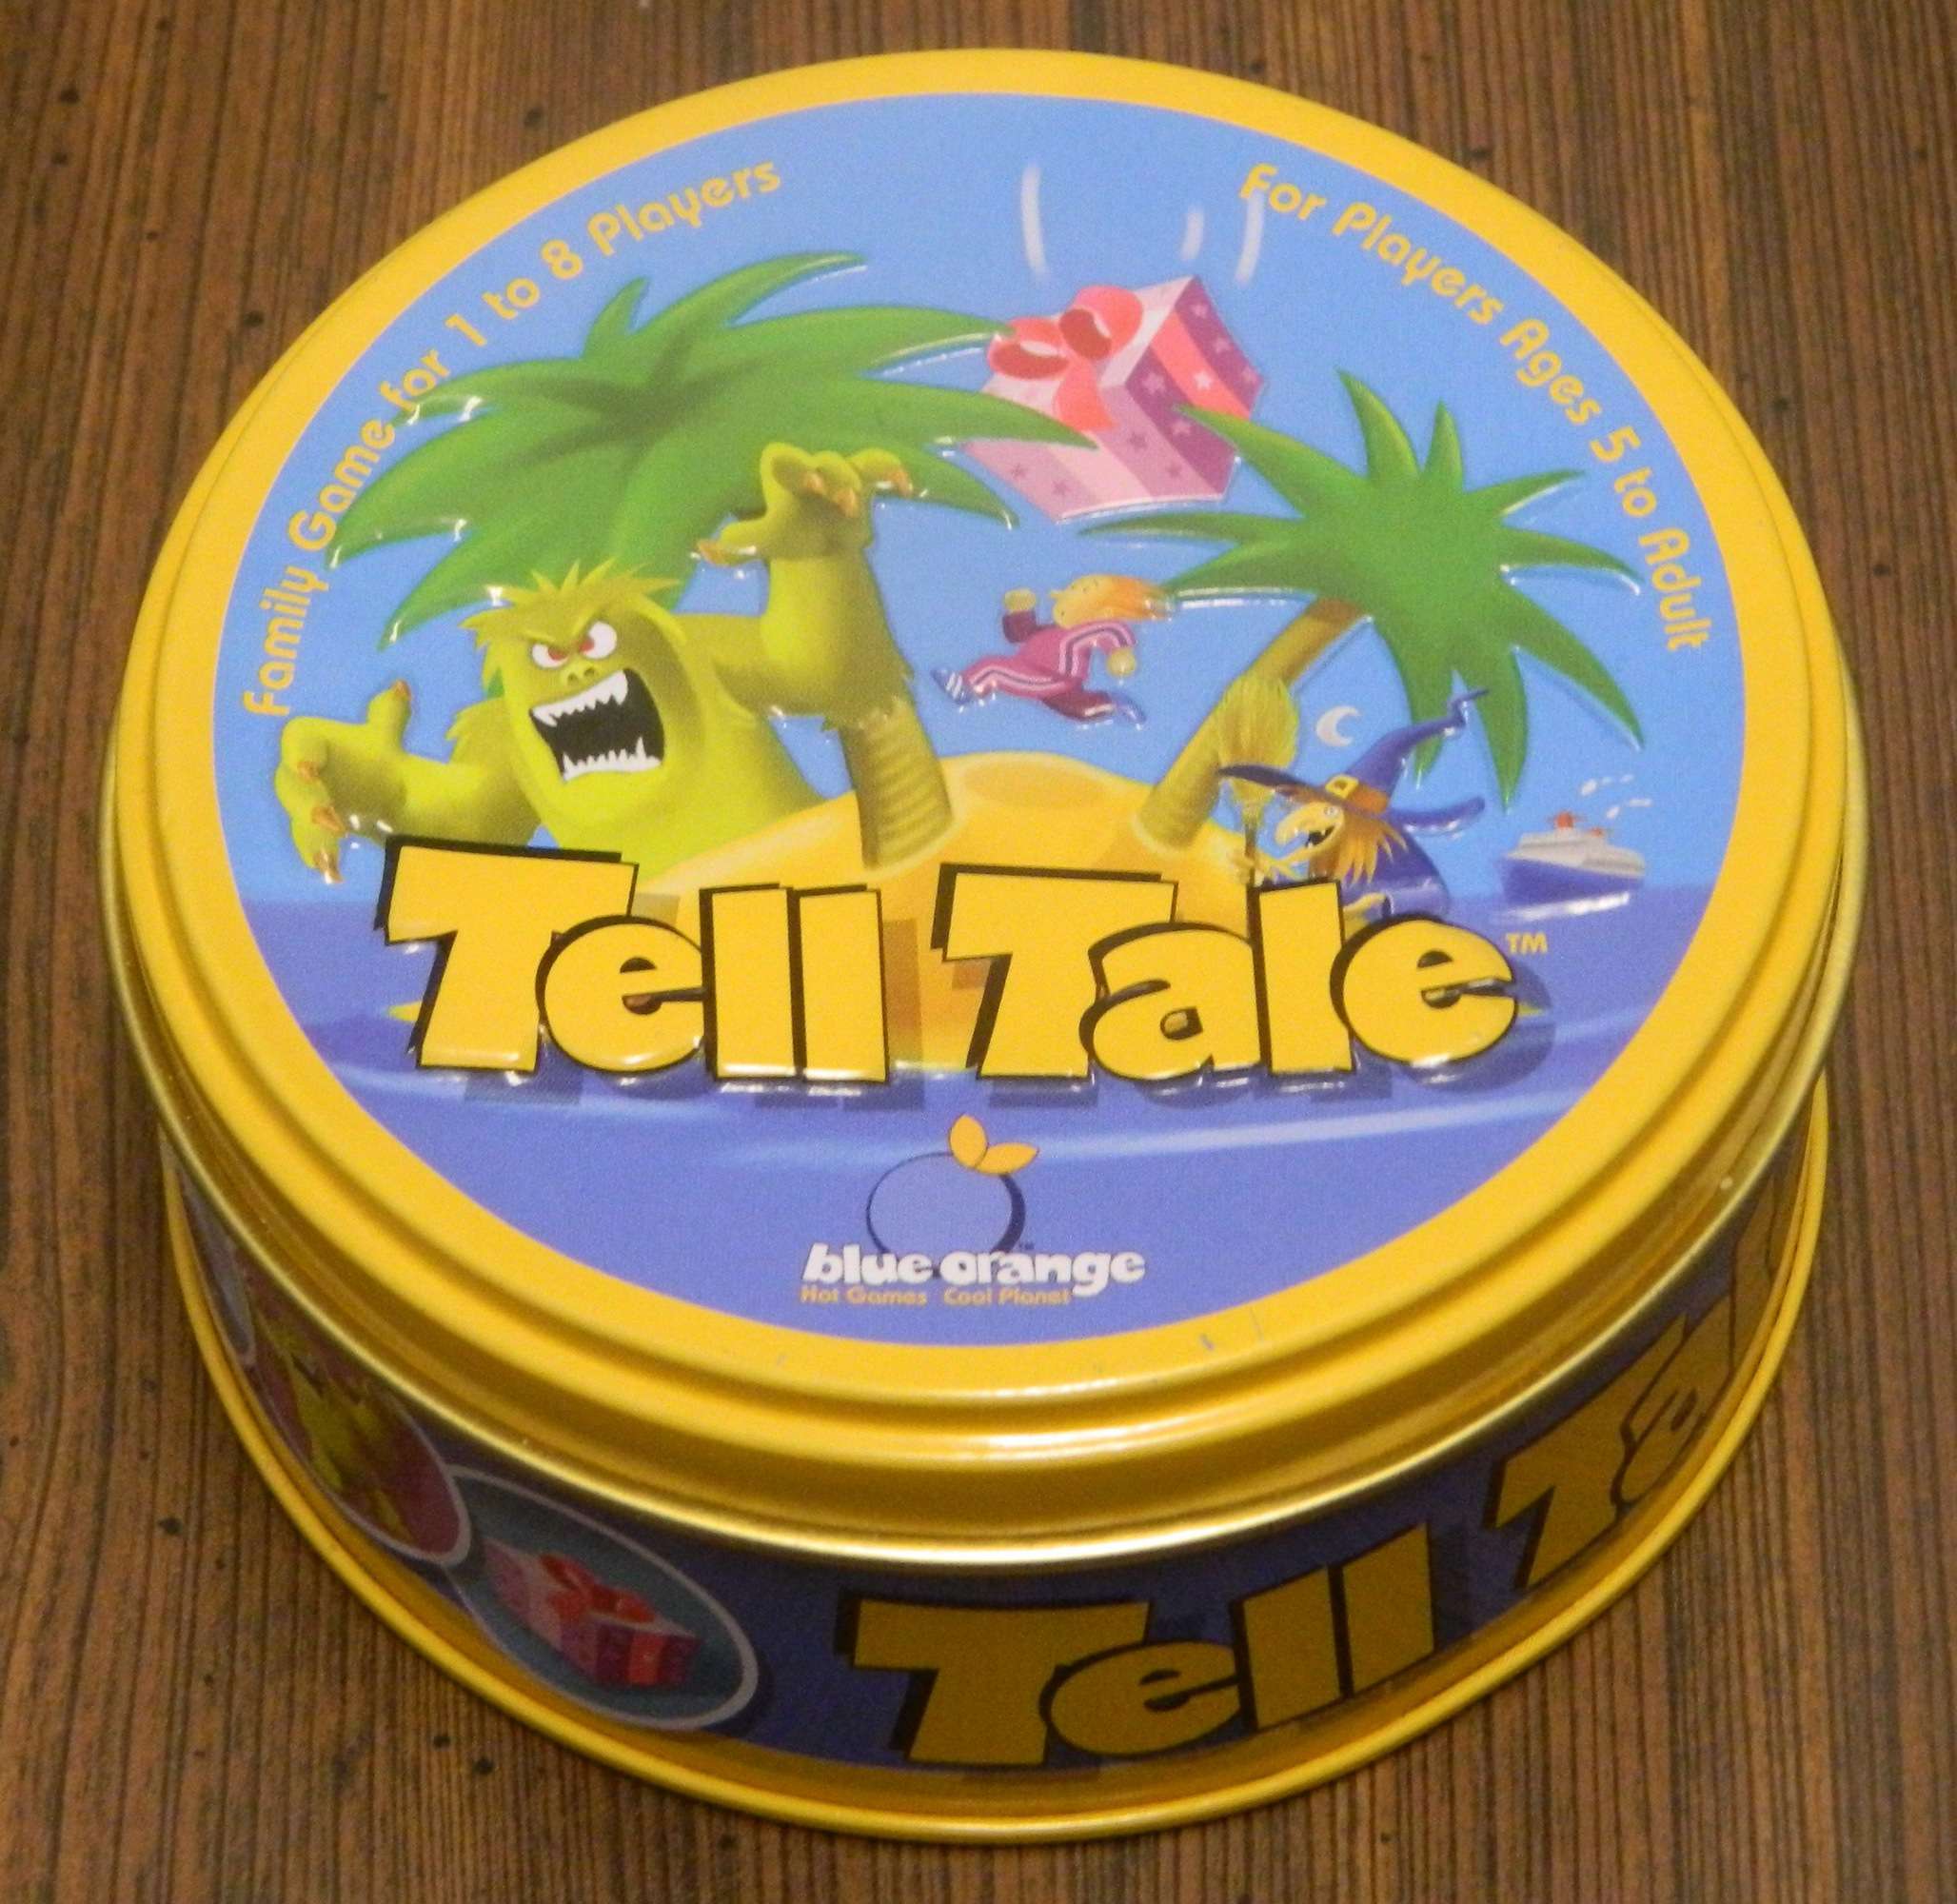 Tell Tale Card Game Review